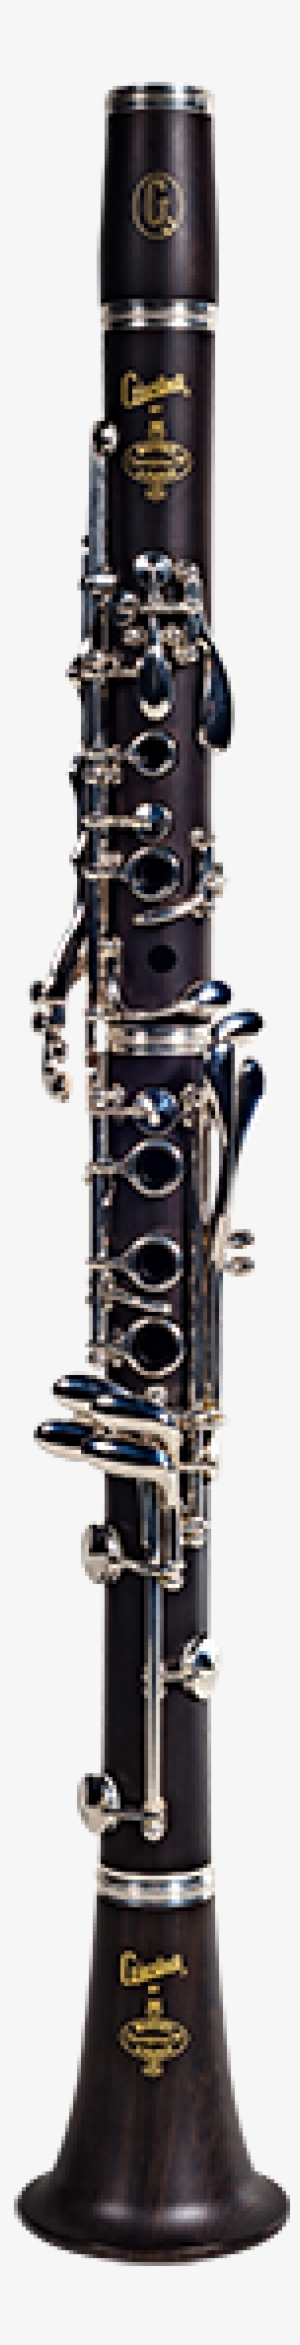 Transparent Clarinet Buffet Image Free - Giardinelli By Buffet Clarinet